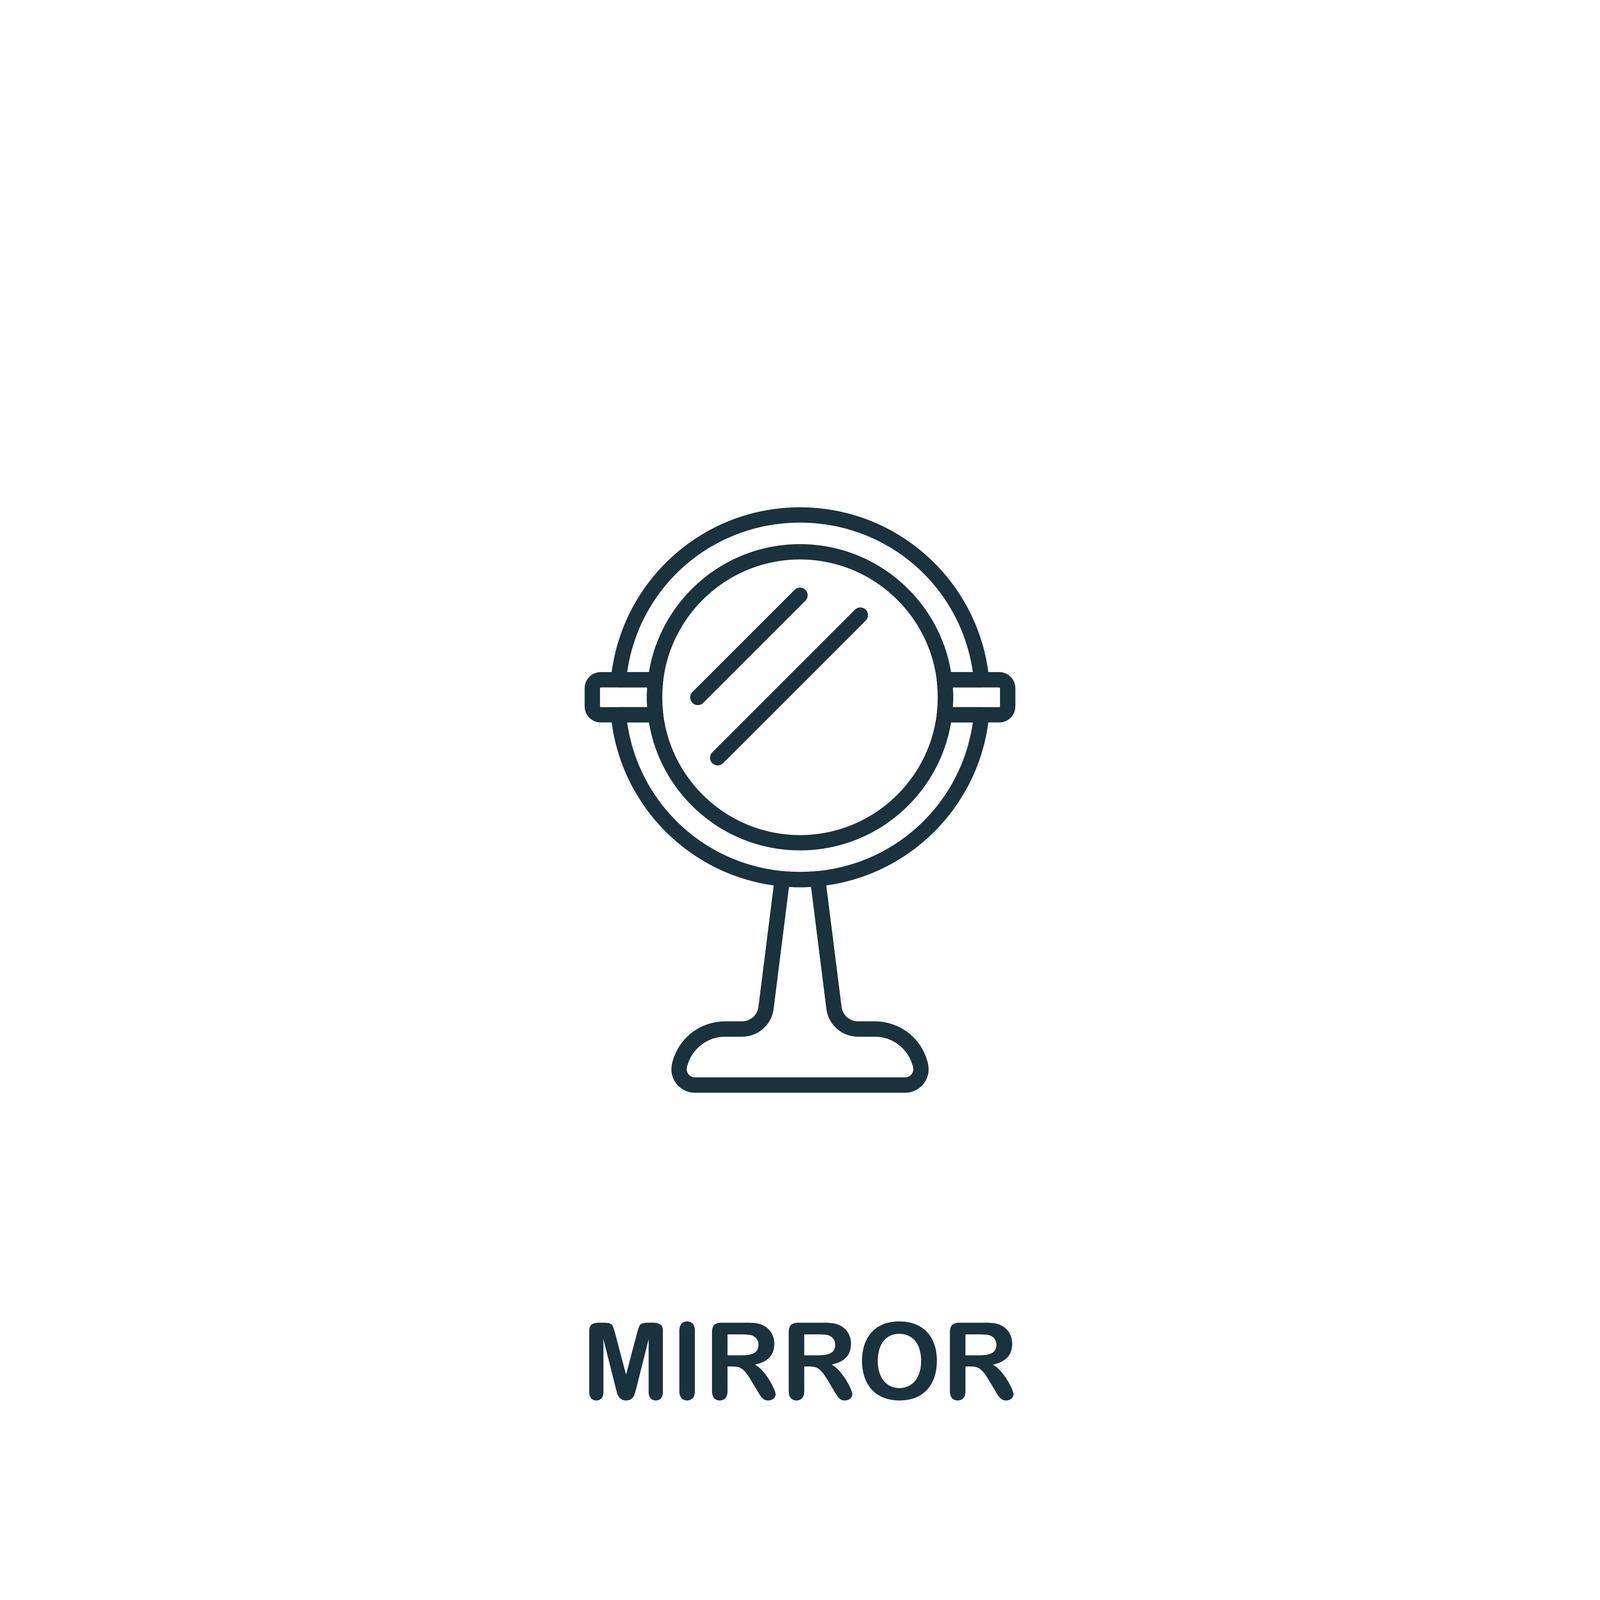 Mirror icon. Line simple icon for templates, web design and infographics by simakovavector